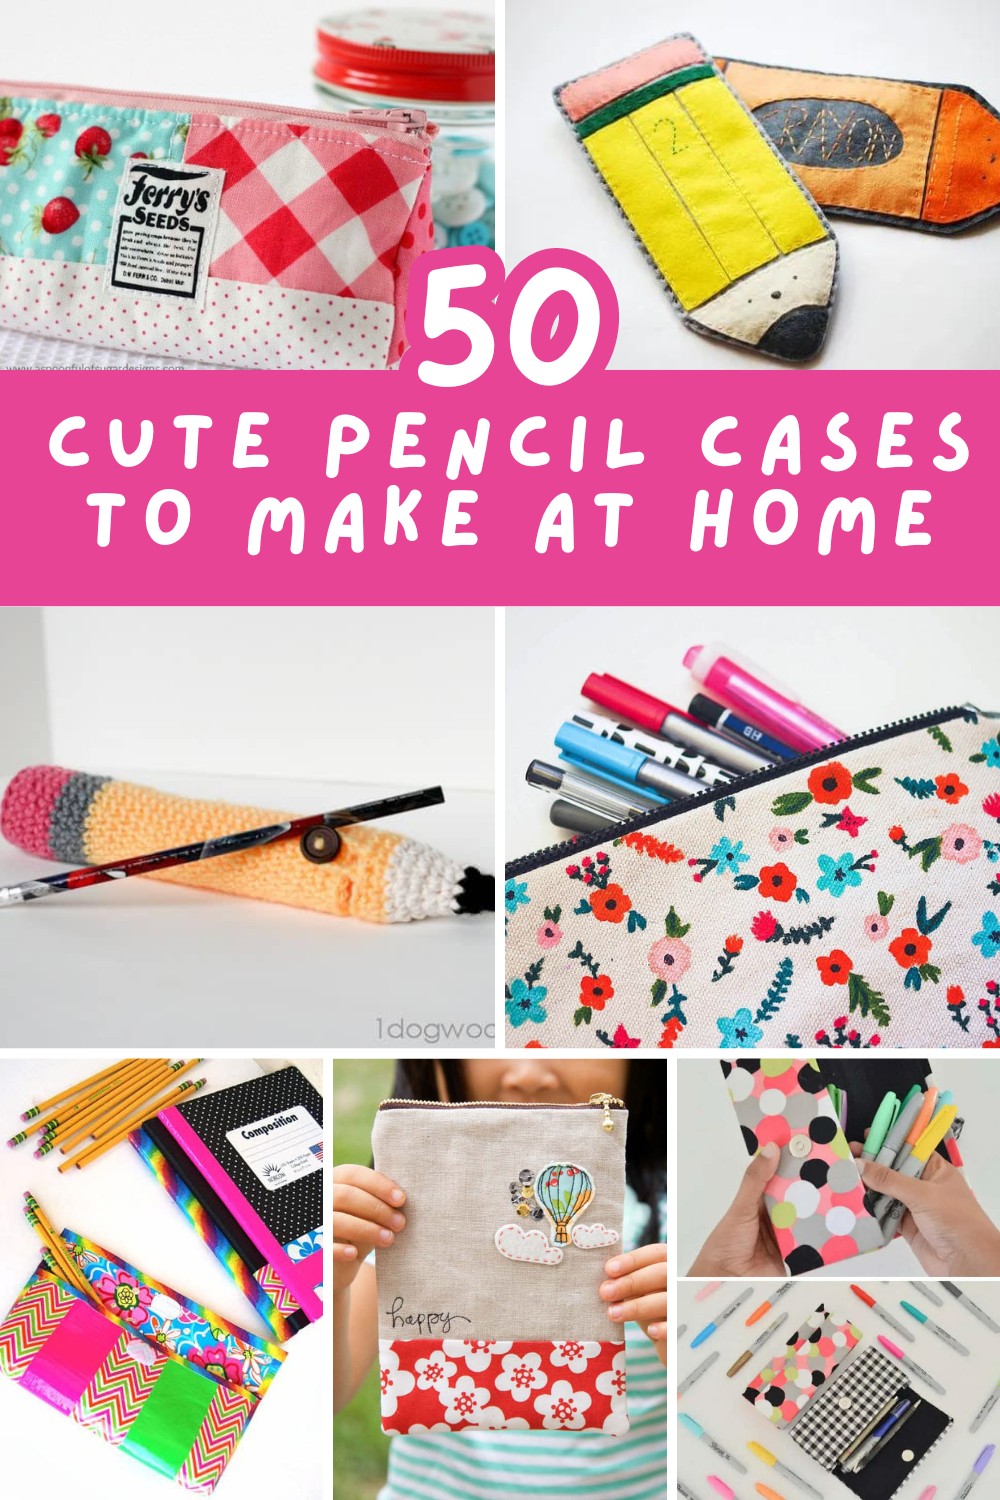 Say goodbye to boring pencil pouches! Dive into these 40 creative DIY pencil case ideas and make your back-to-school gear truly unique. Get crafting now! #DIYBackToSchool #UniquePencilCases

